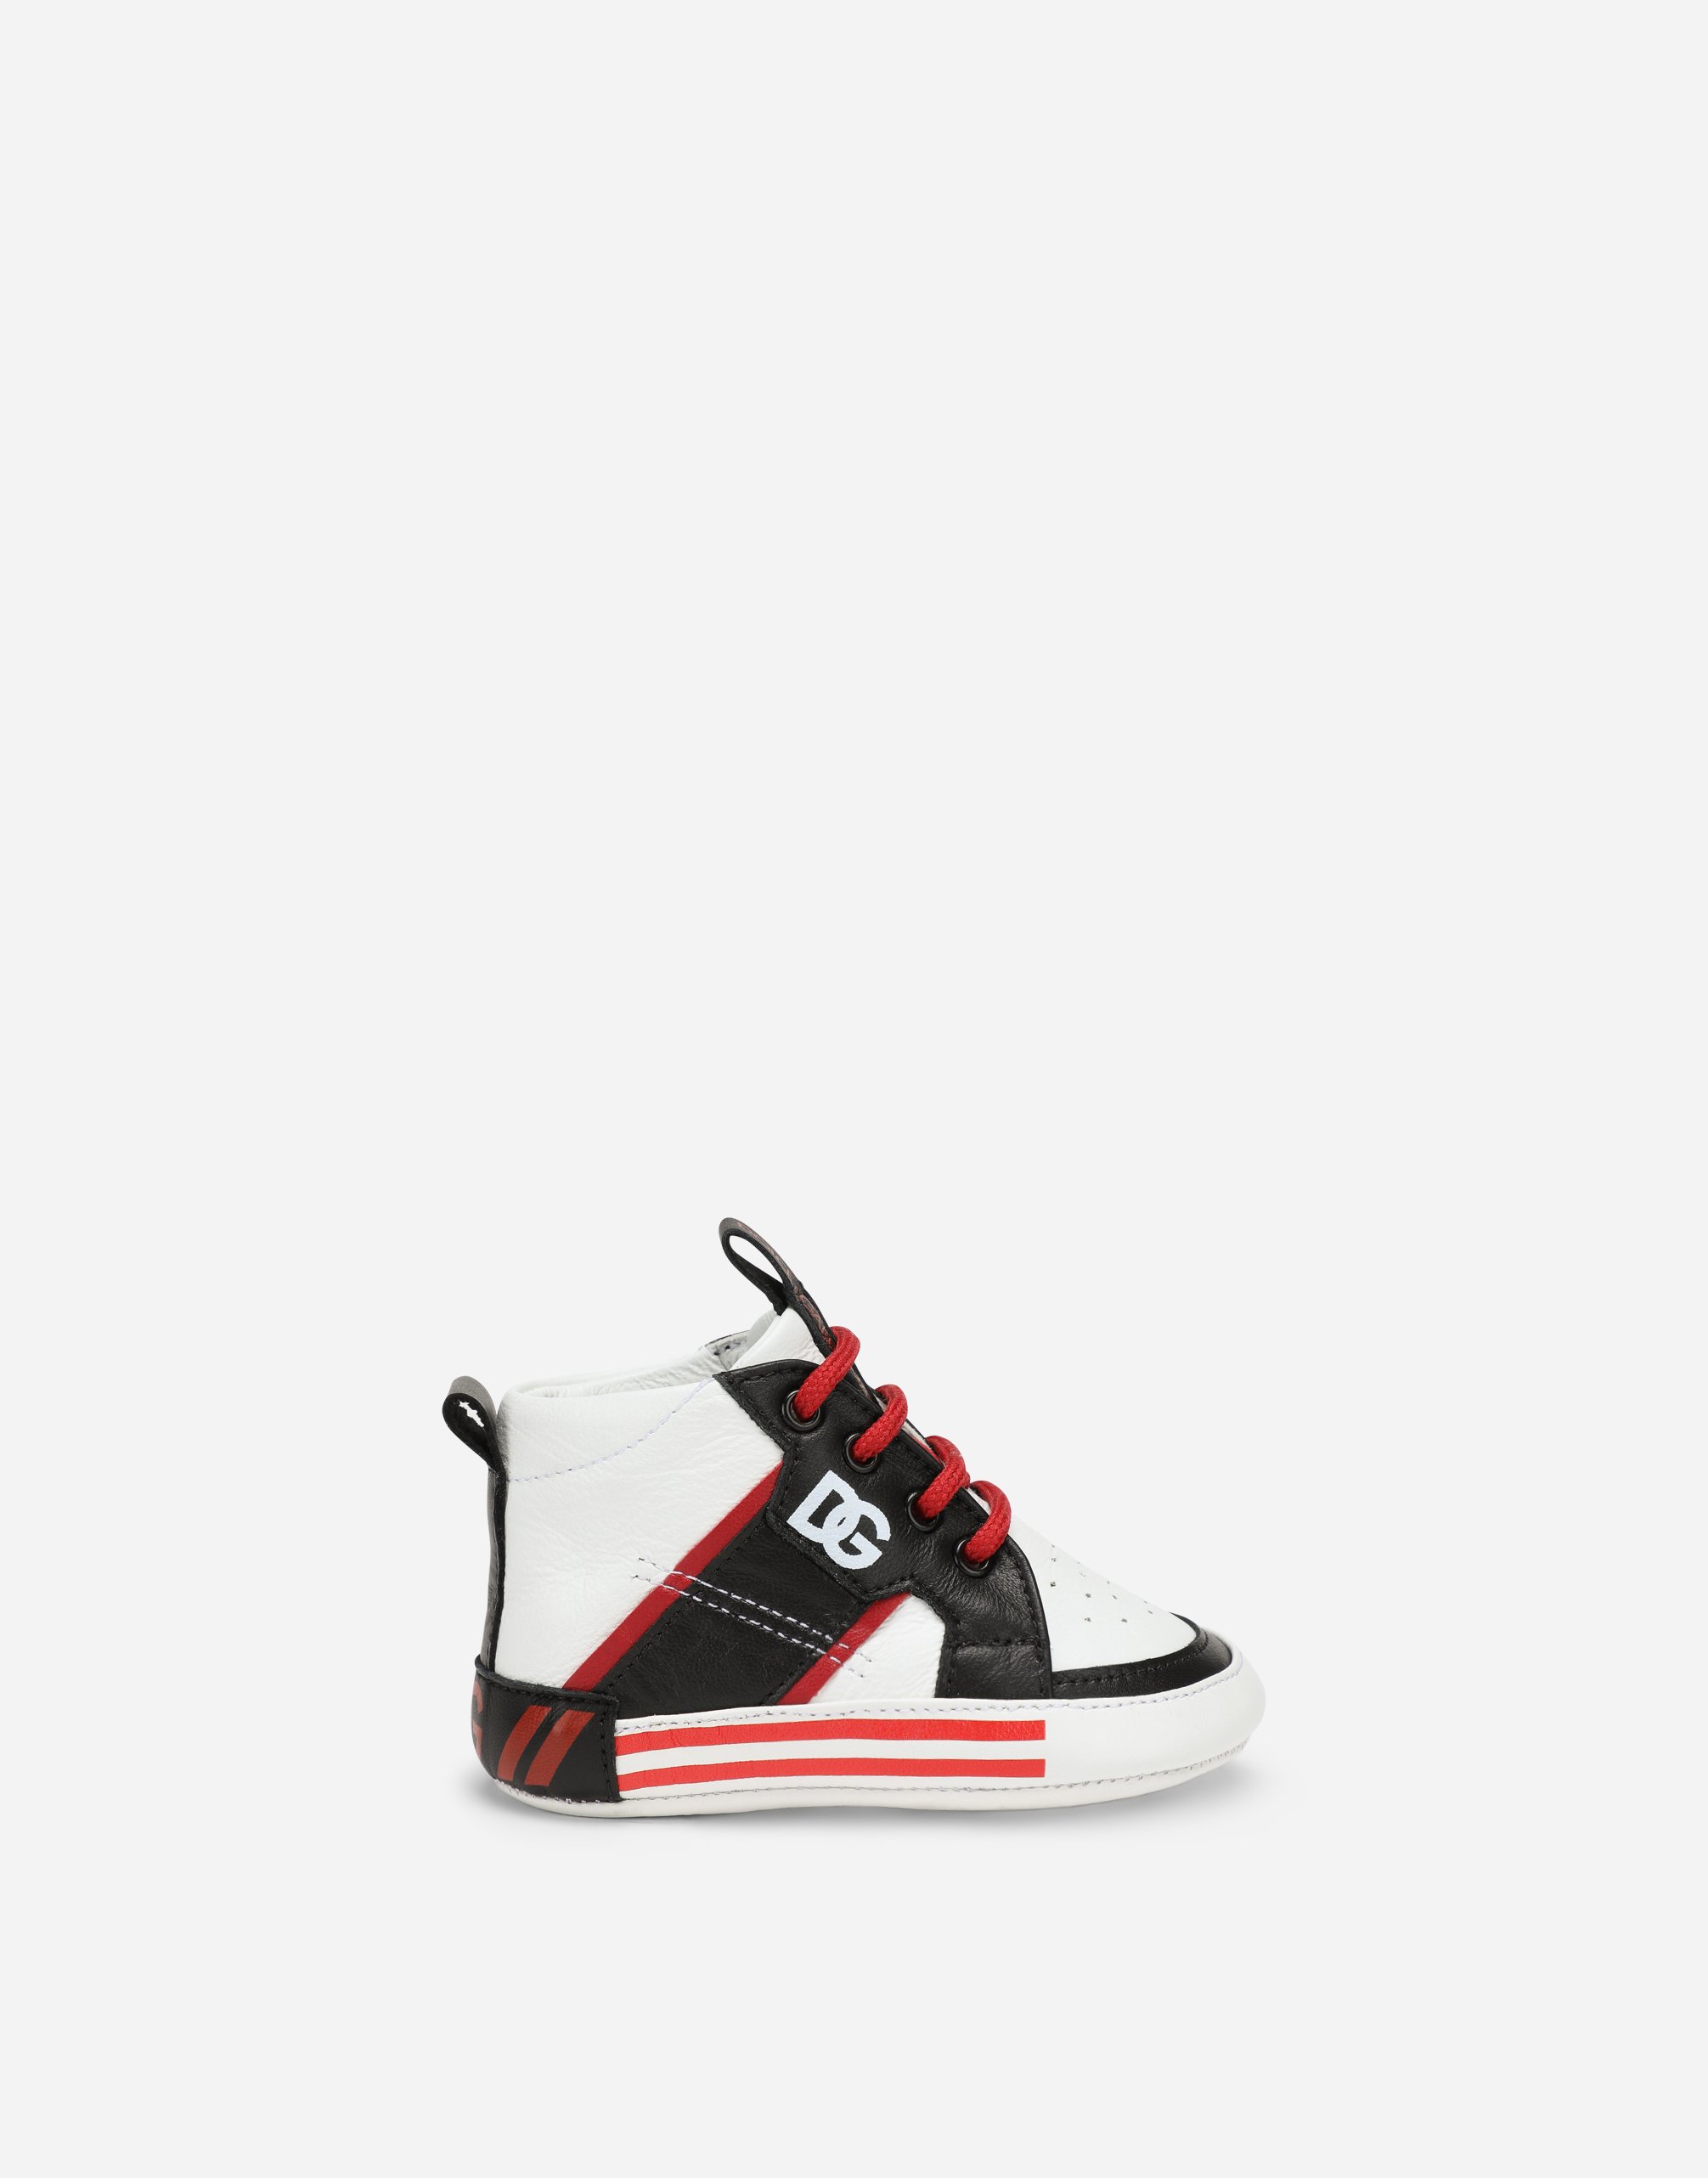 Nappa leather sneaker with DG logo in Multicolor